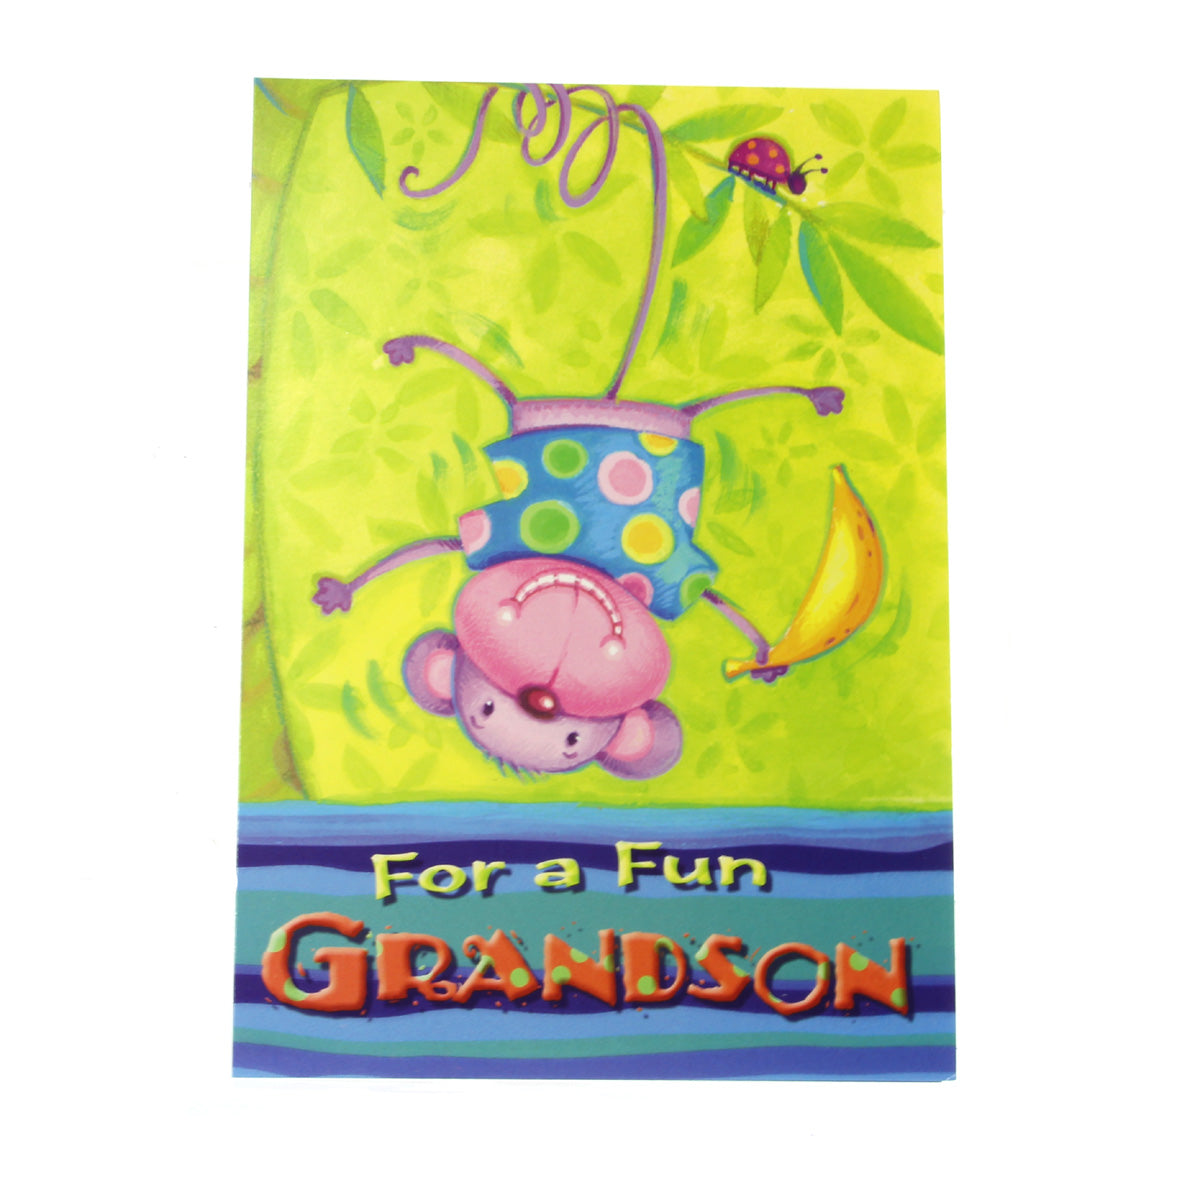 Birthday Card: For a fun Grandson (image of a monkey)